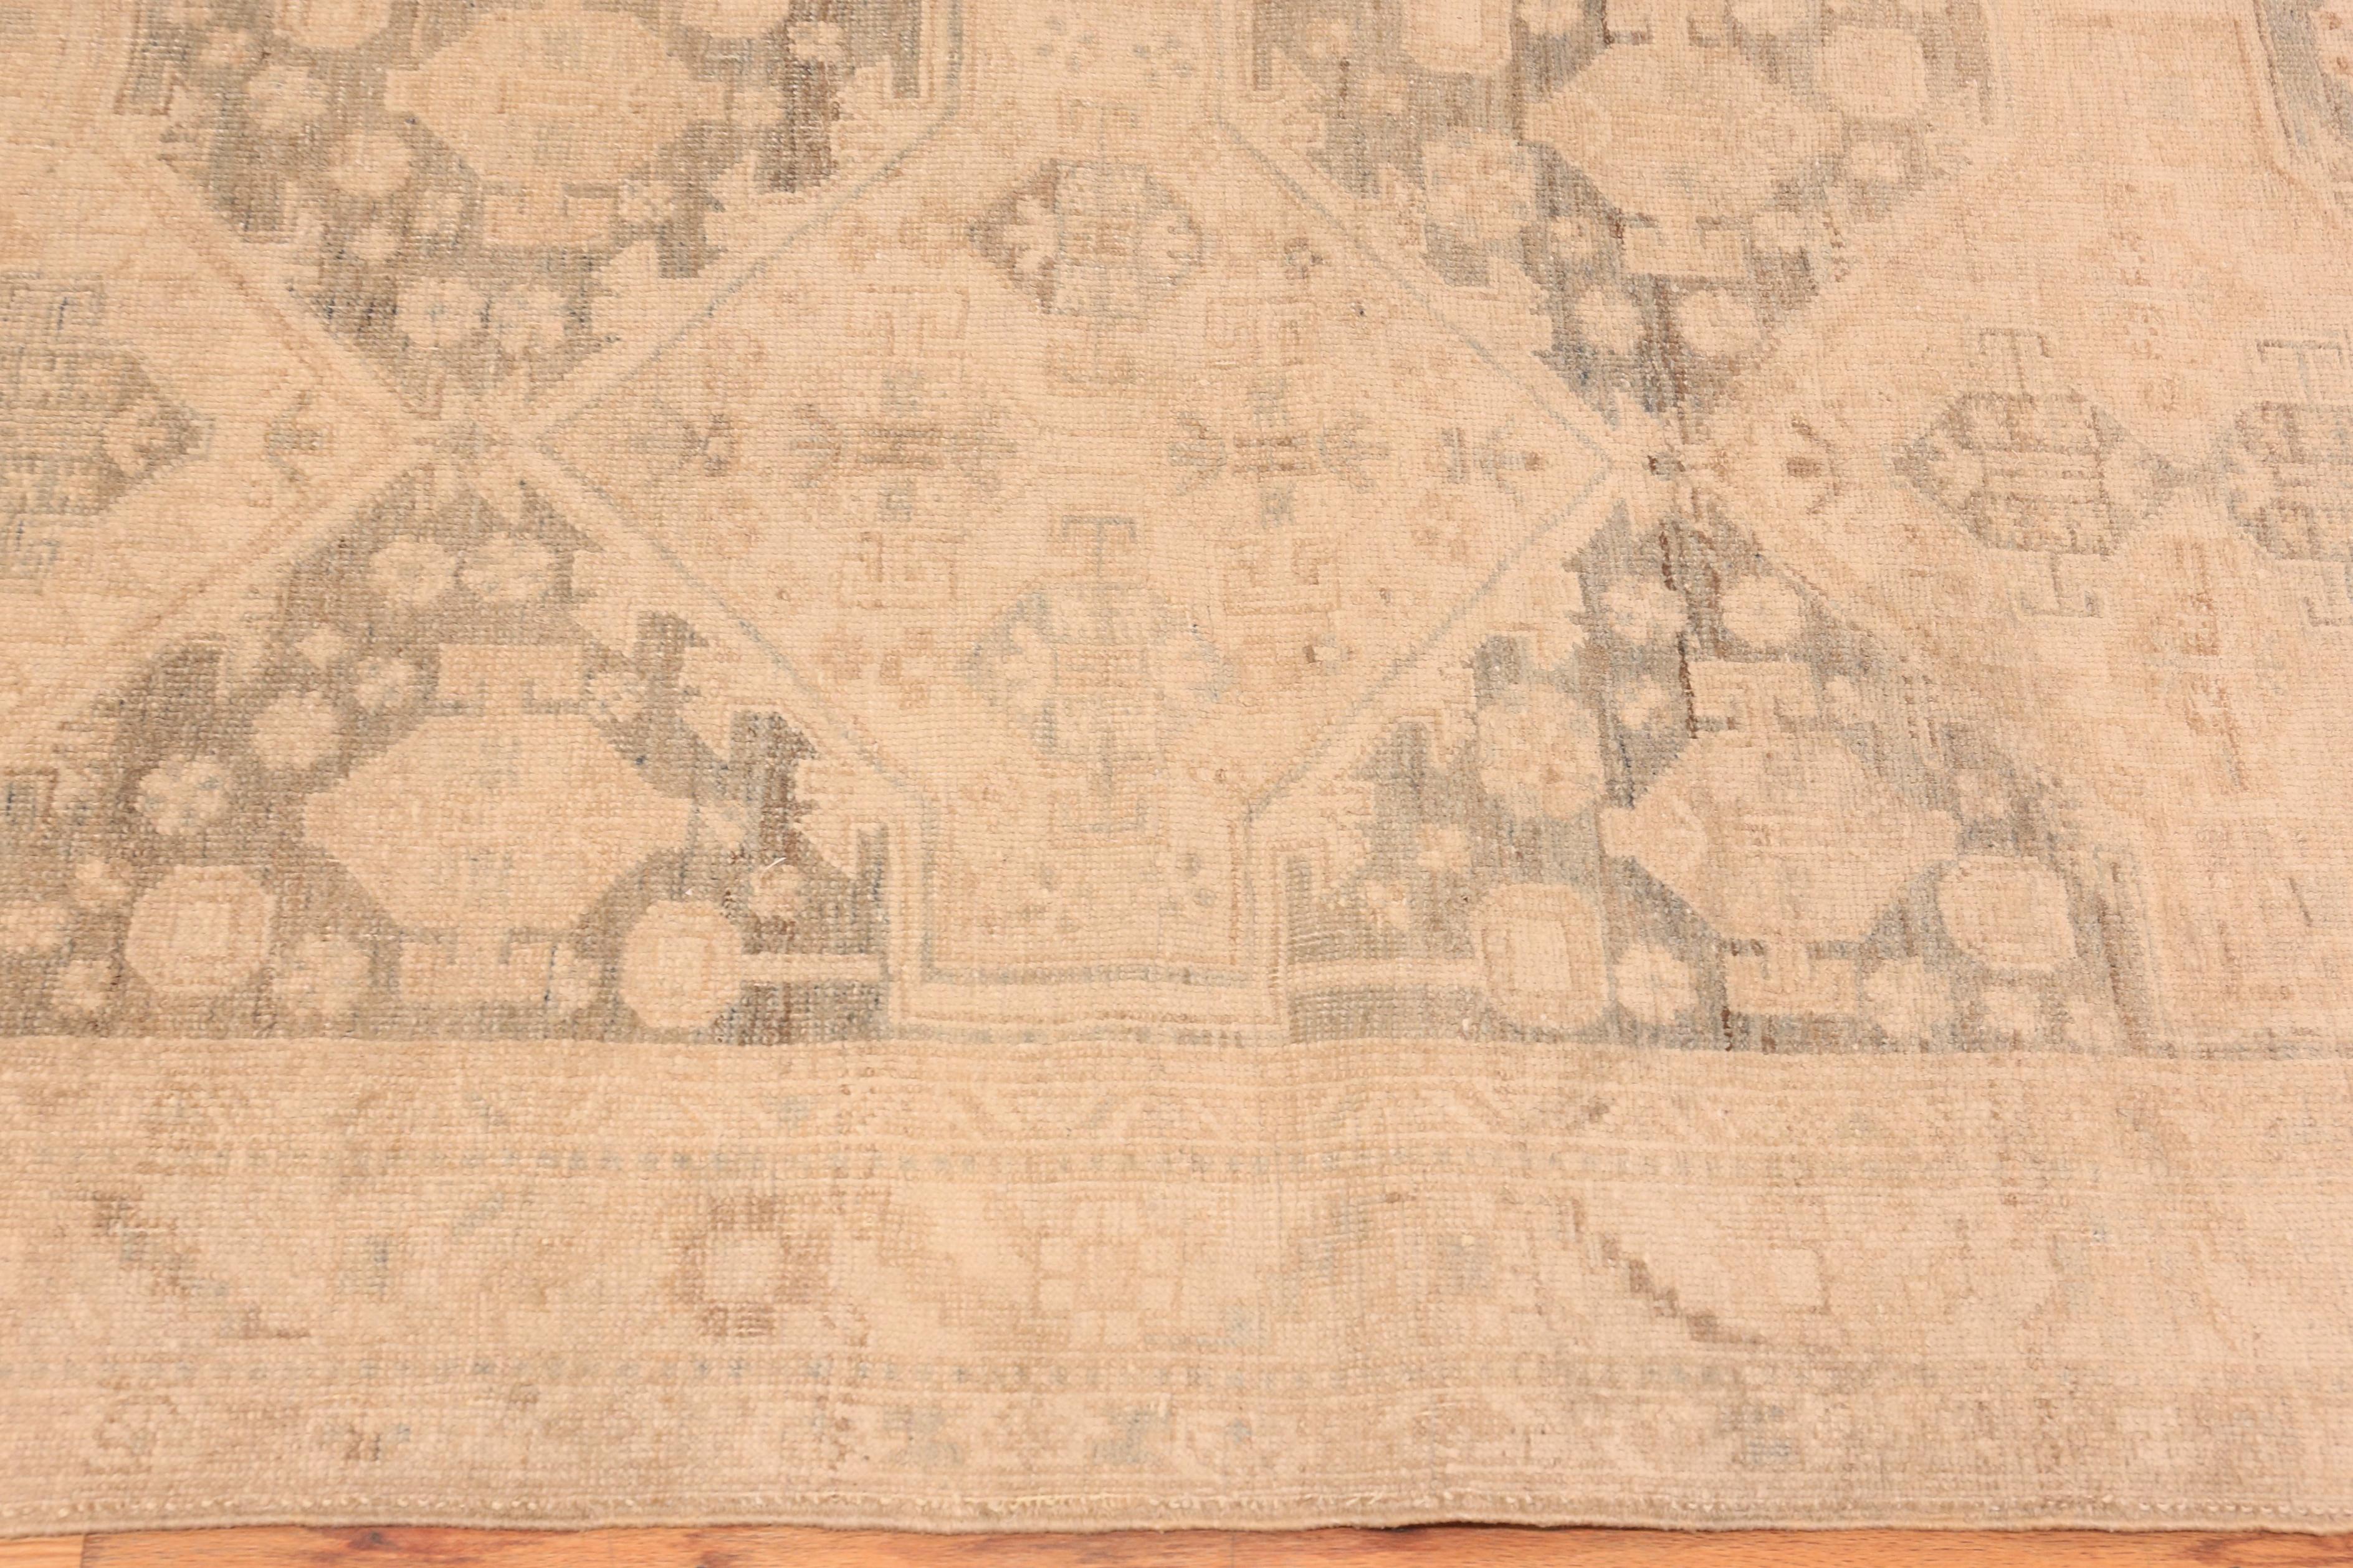 Hand-Knotted Cream Antique Persian Bidjar Runner Rug 3 ft 7 in x 10 ft 10 in (1.09 m x 3.3 m)